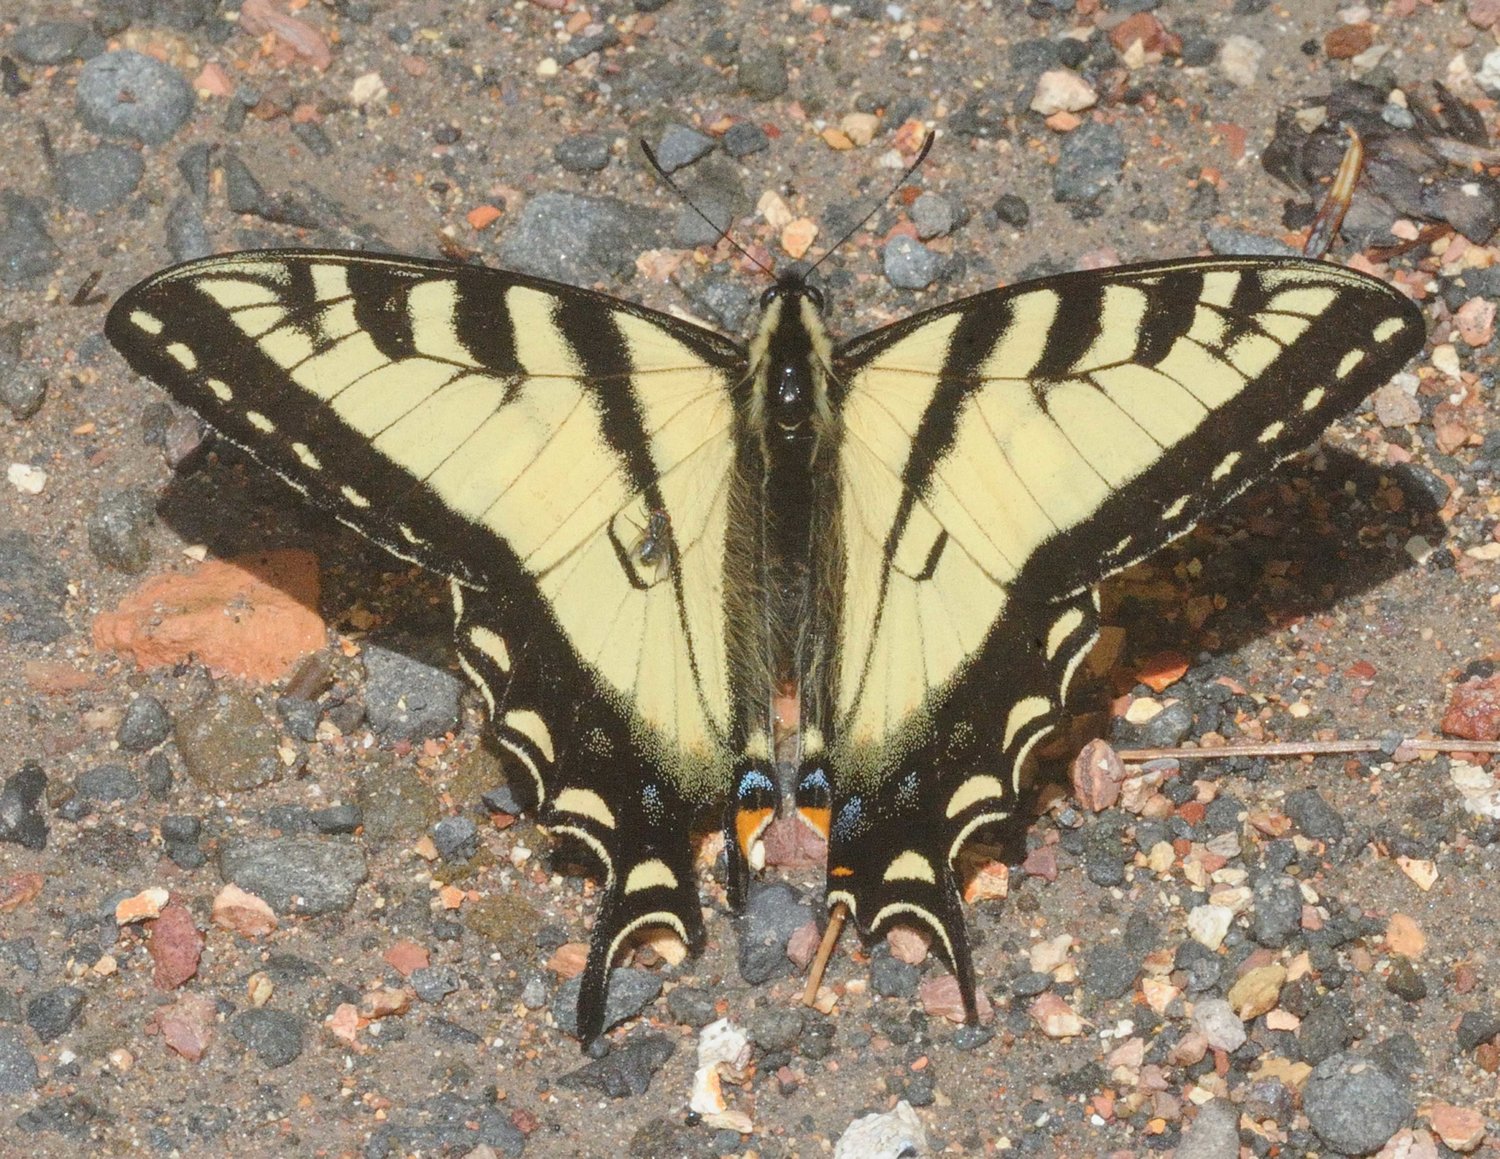 The eastern tiger swallowtail is frequently around gardens, forest edges and parks; it is very common. The female has a light and a dark phase. With the dark-phase female, the “tiger stripes” can sometimes be seen faintly on the forewings as darker bands. This species will feed on milkweed nectar; they are frequently found together with monarchs.